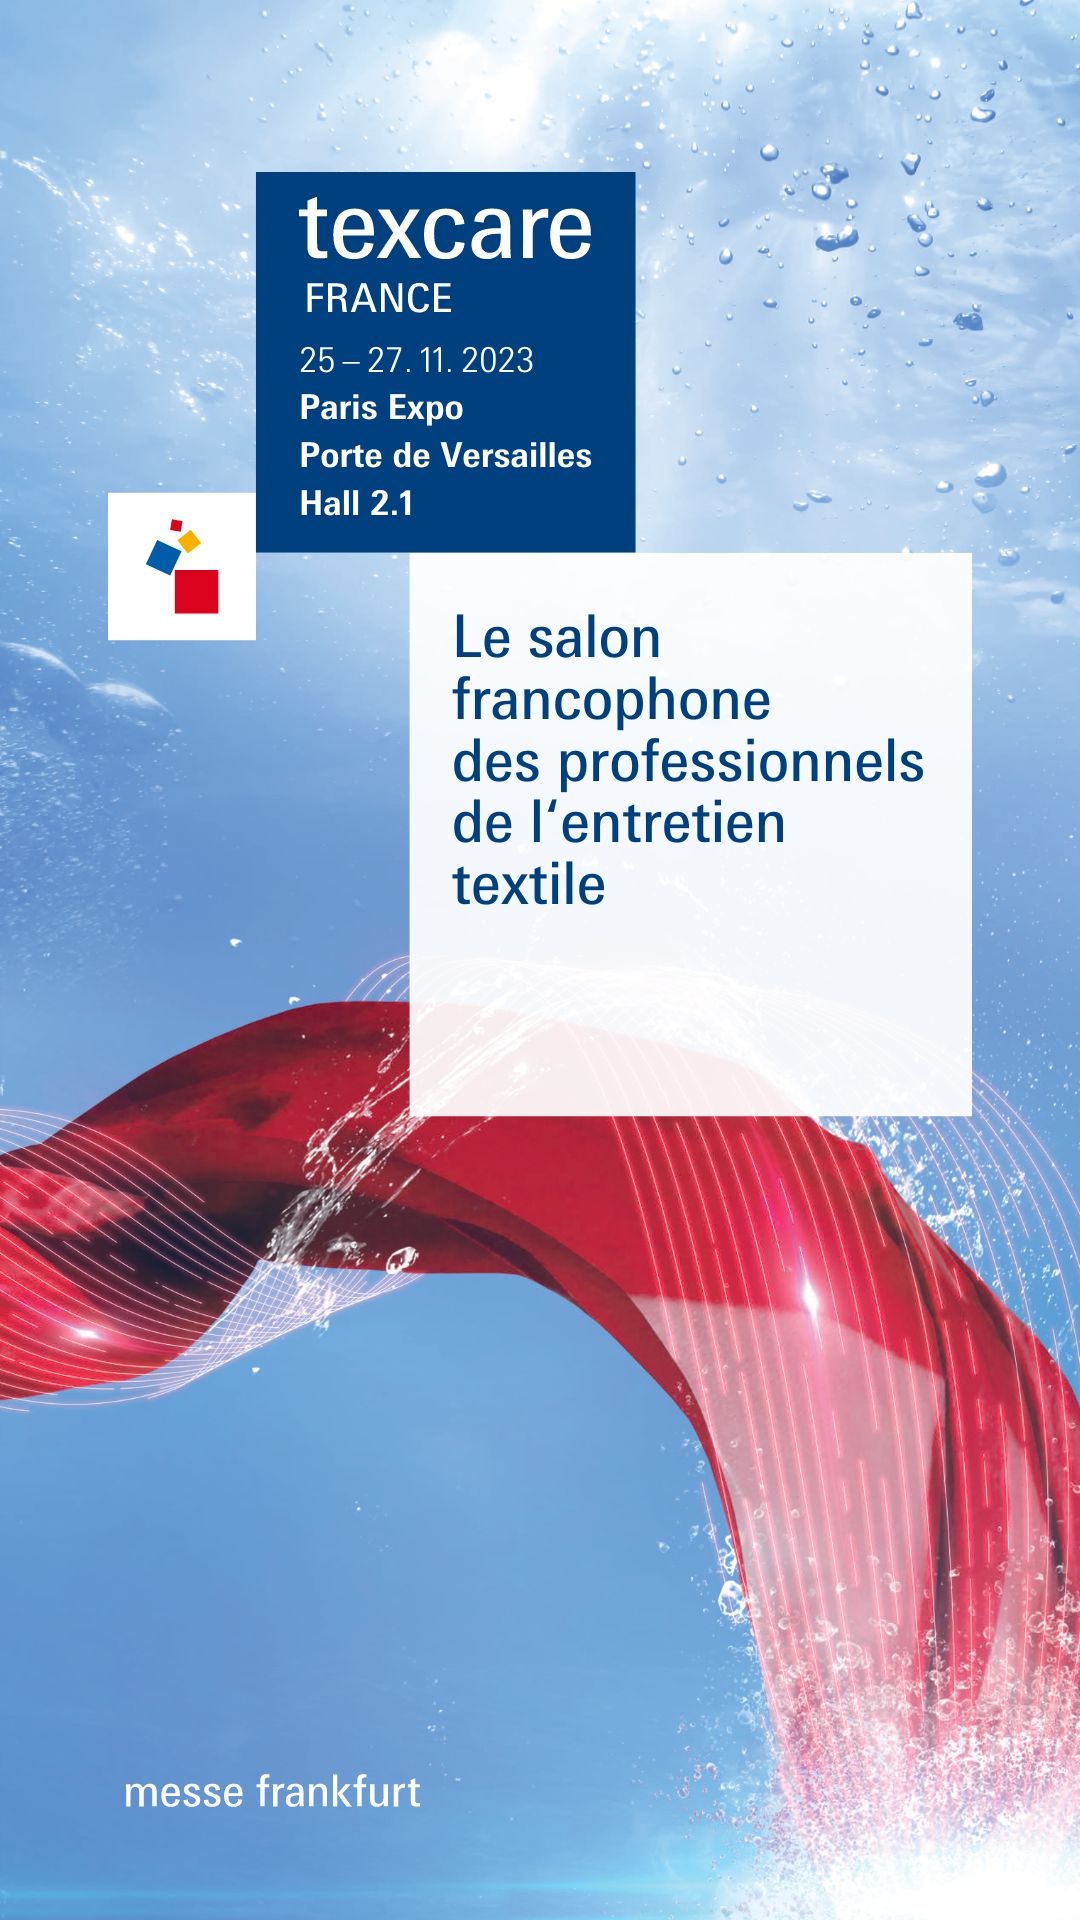 Texcare France